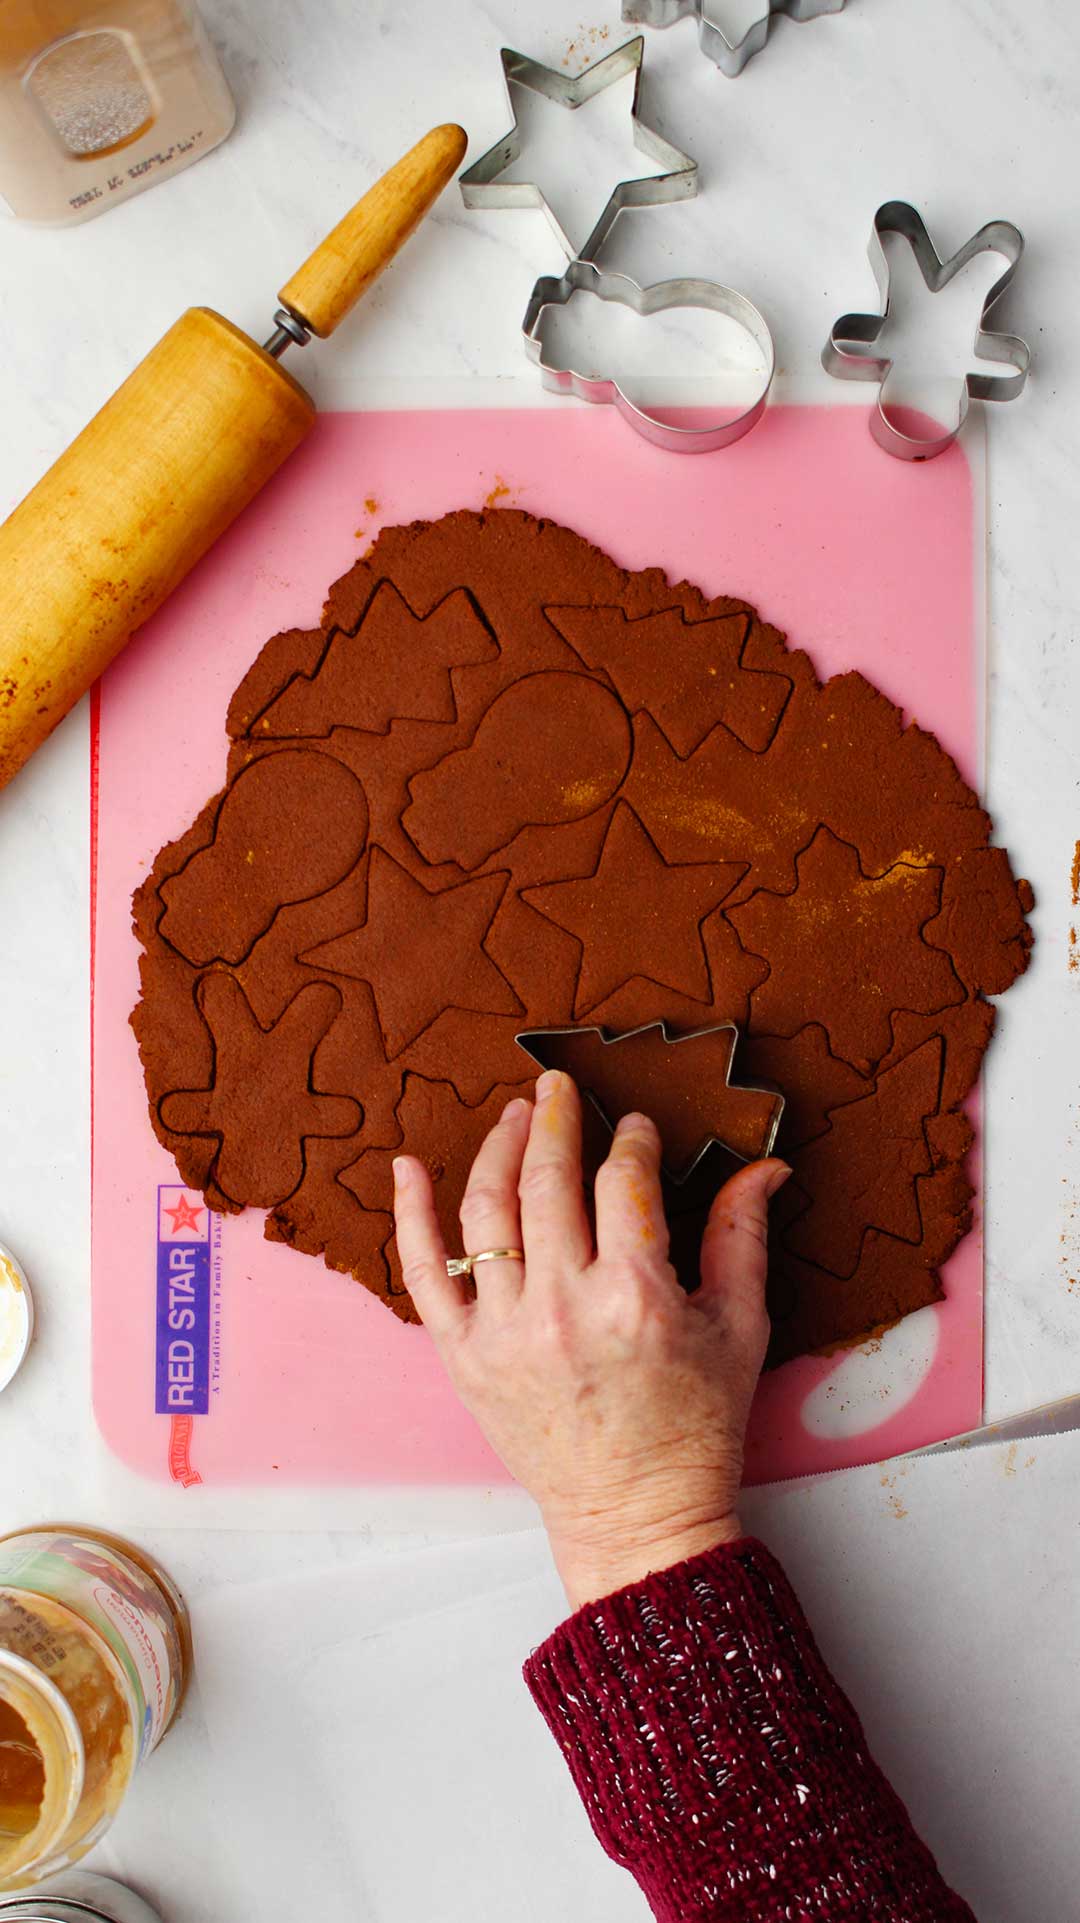 Hand pressing Christmas tree cookie cutter into rolled out dough with other shapes cut into it.